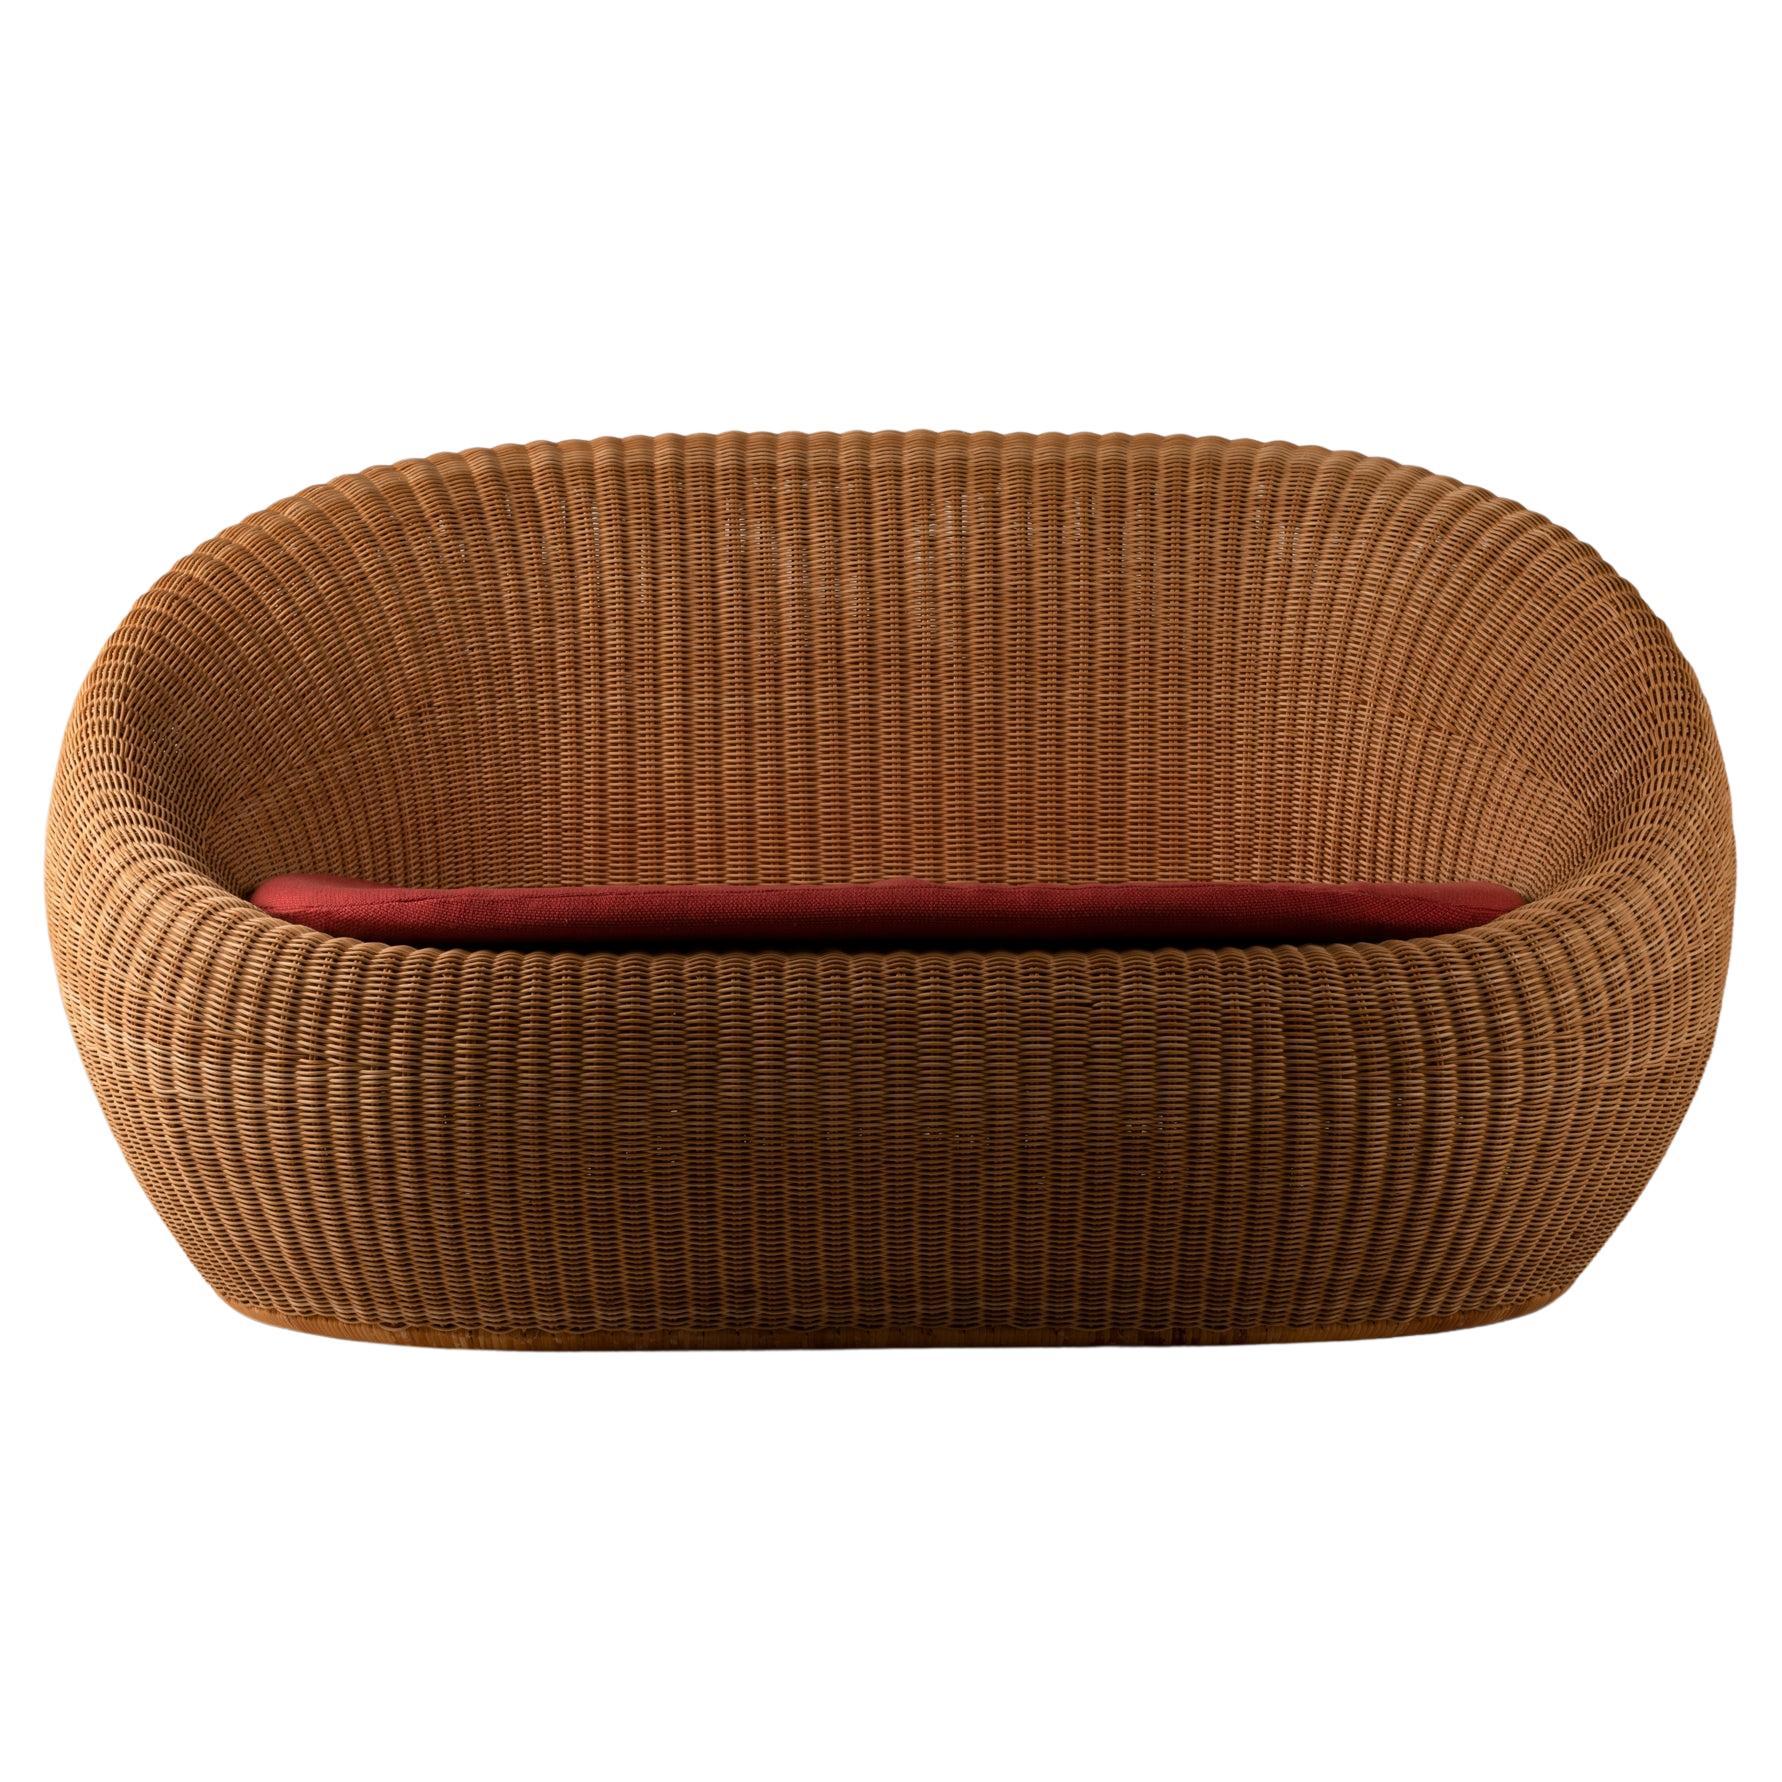 What are the types of rattan?